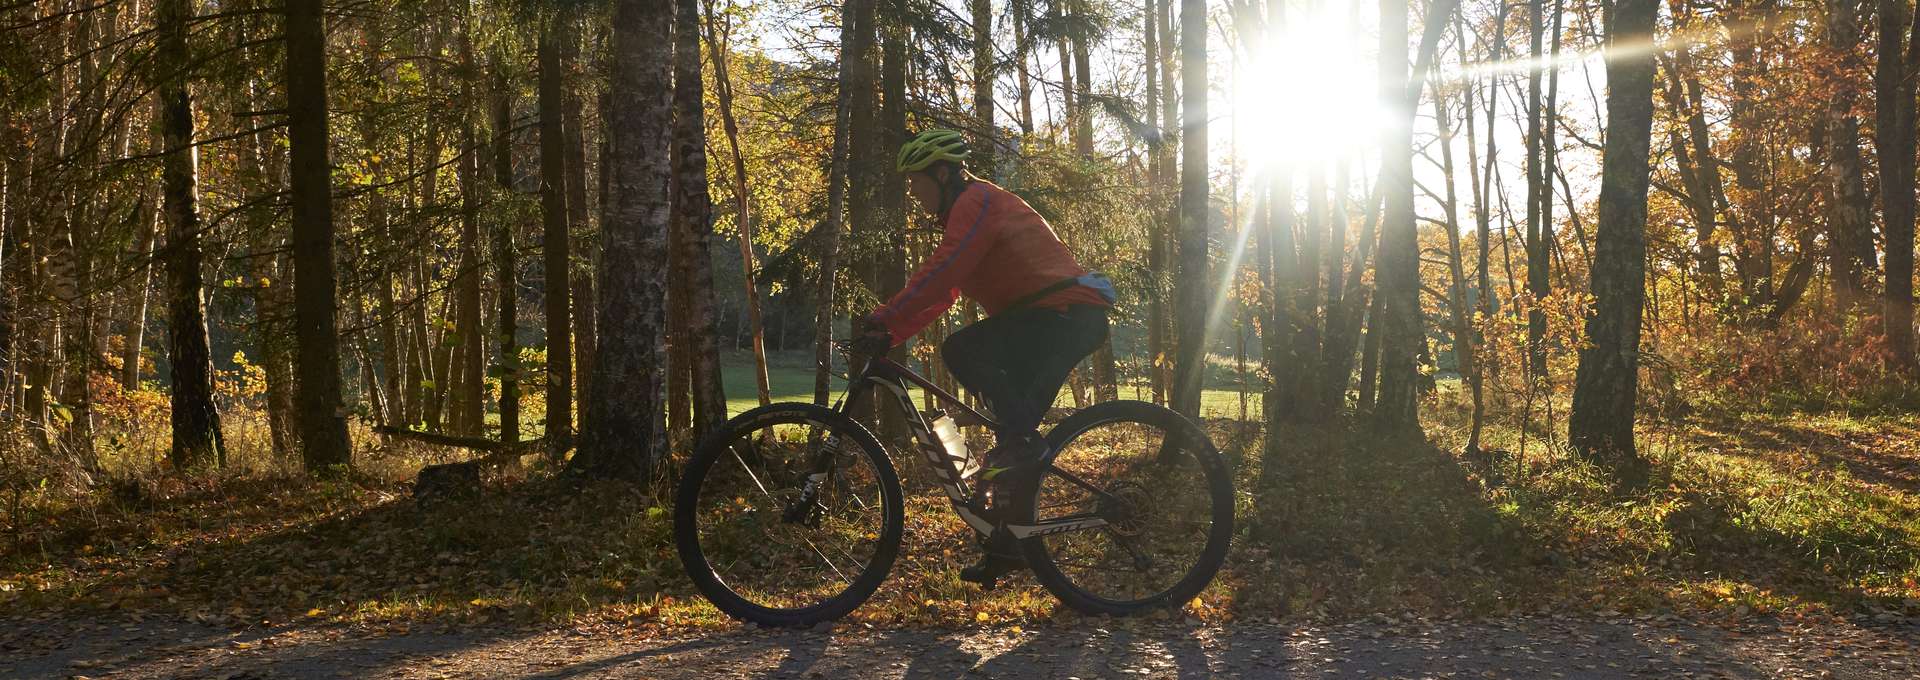 Cyclists in Vilsta. Autumn colored forrest and sunshine